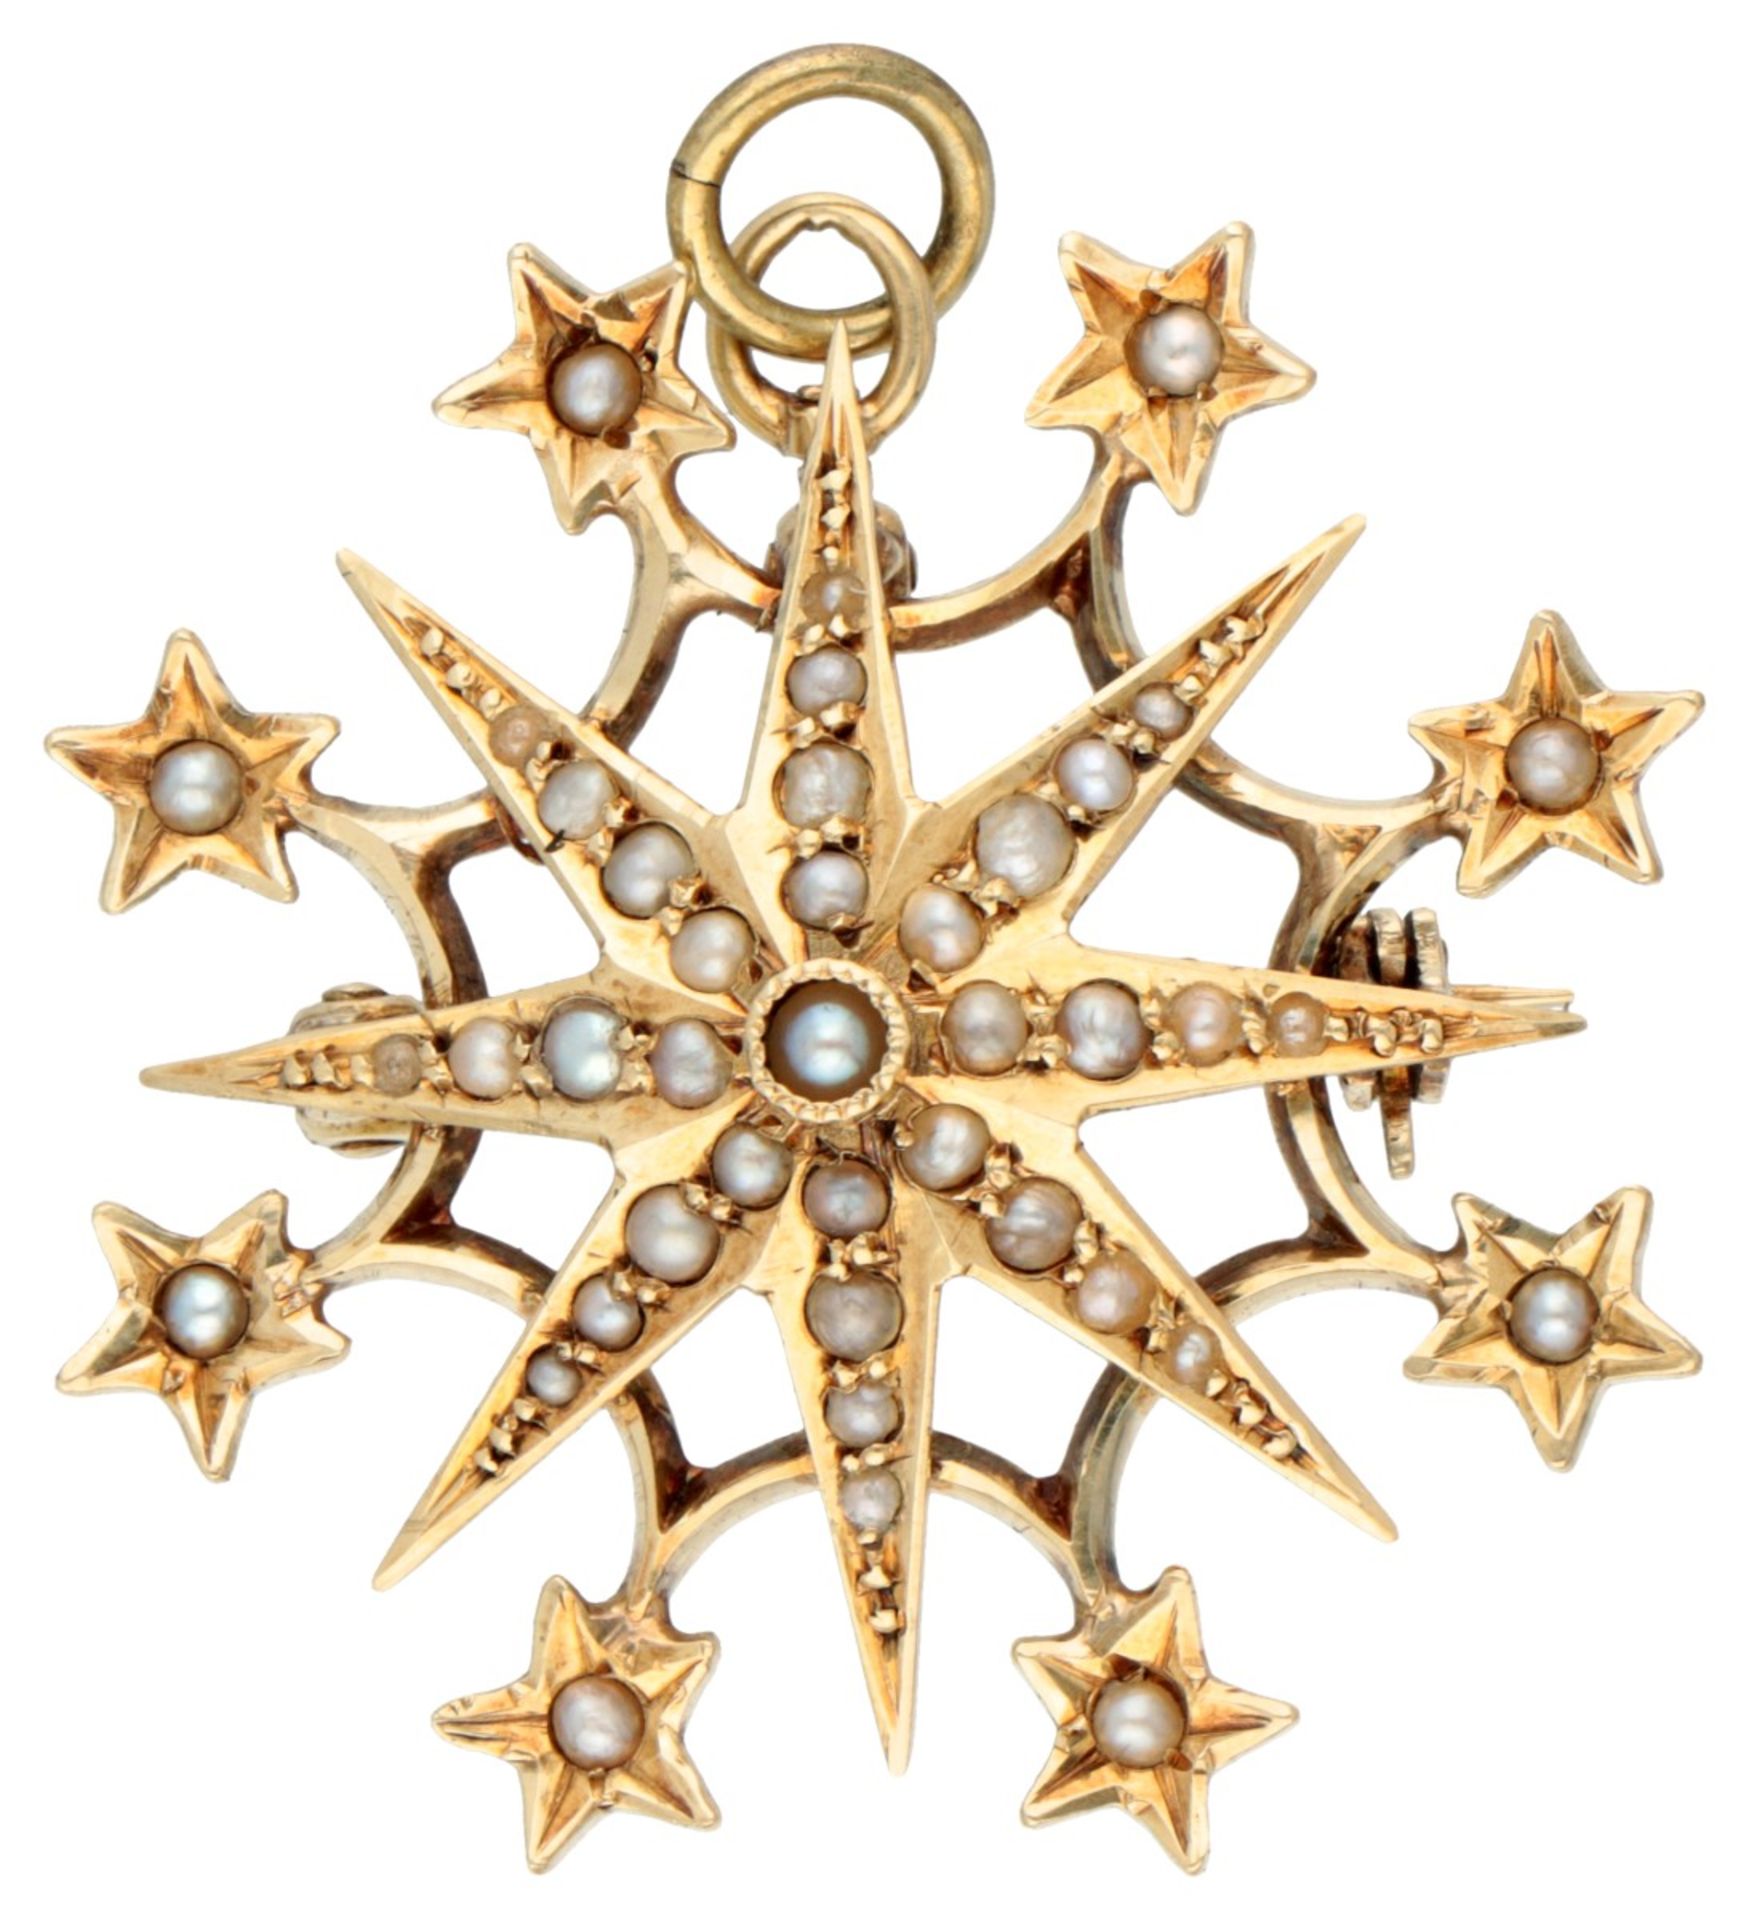 Vintage 10K. yellow gold star brooch / pendant set with seed pearl.